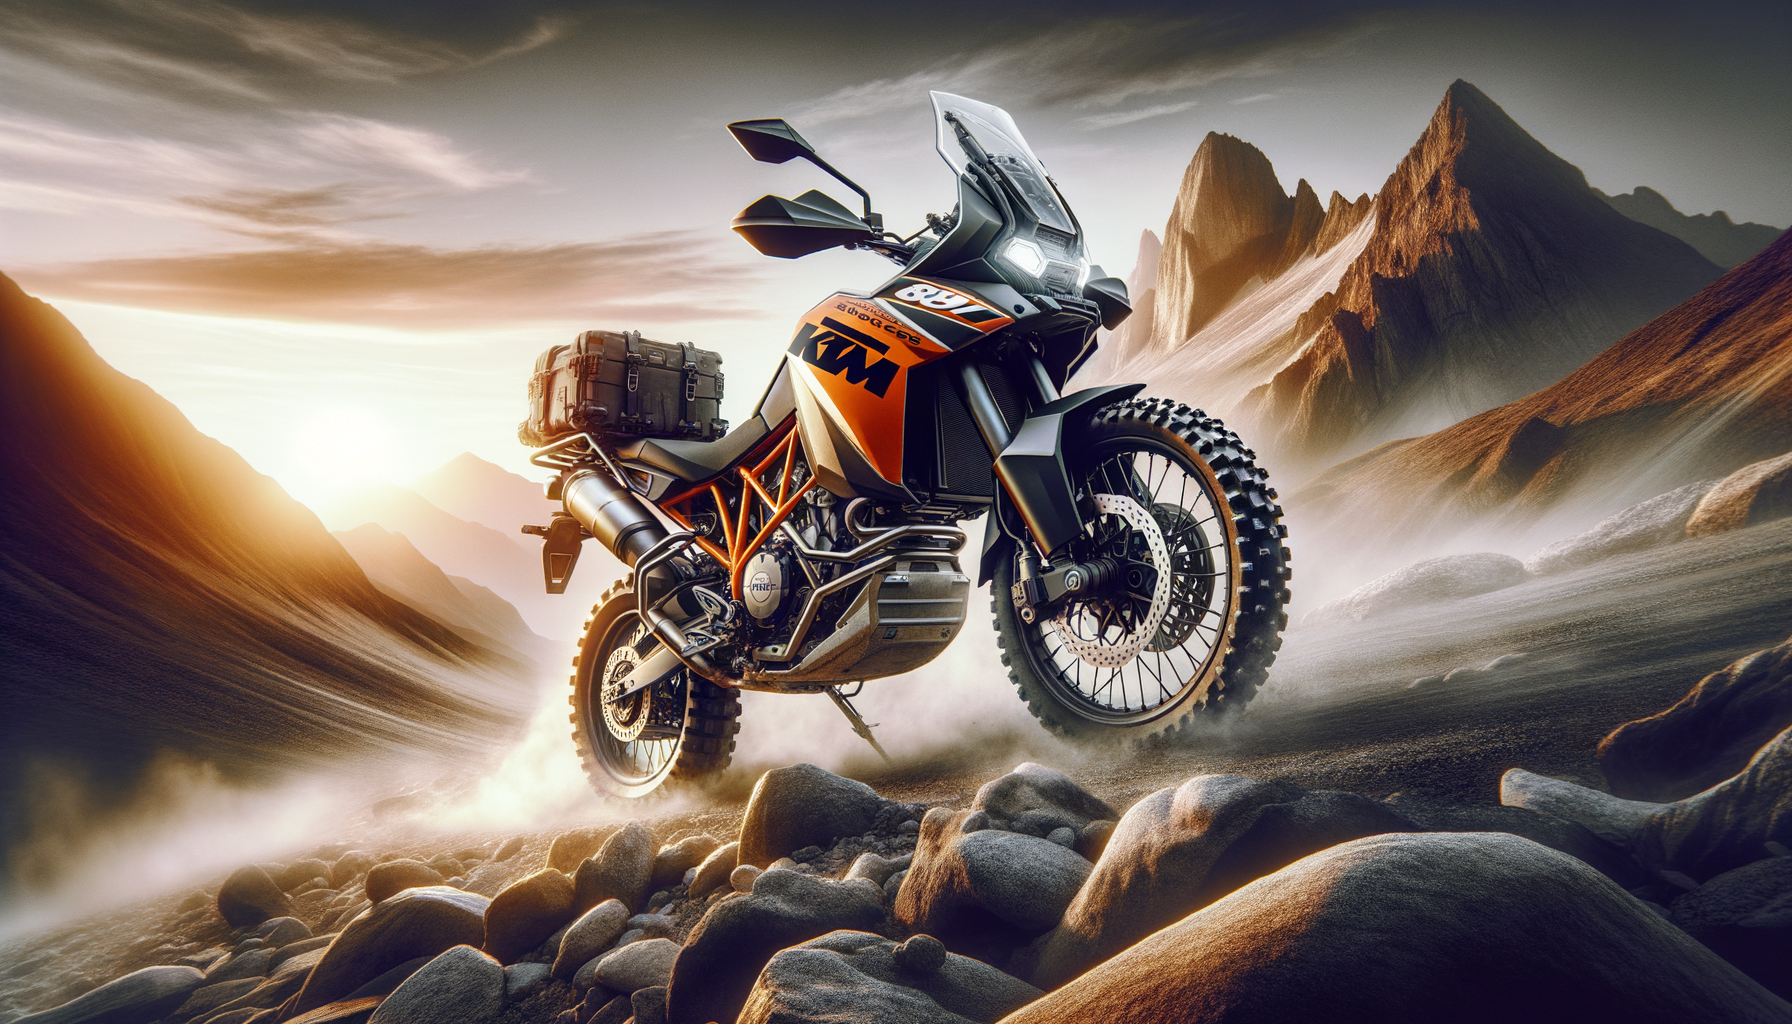 read our comprehensive ktm 890 adventure review to discover all you need to know about this exciting motorcycle, including performance, features, and more.